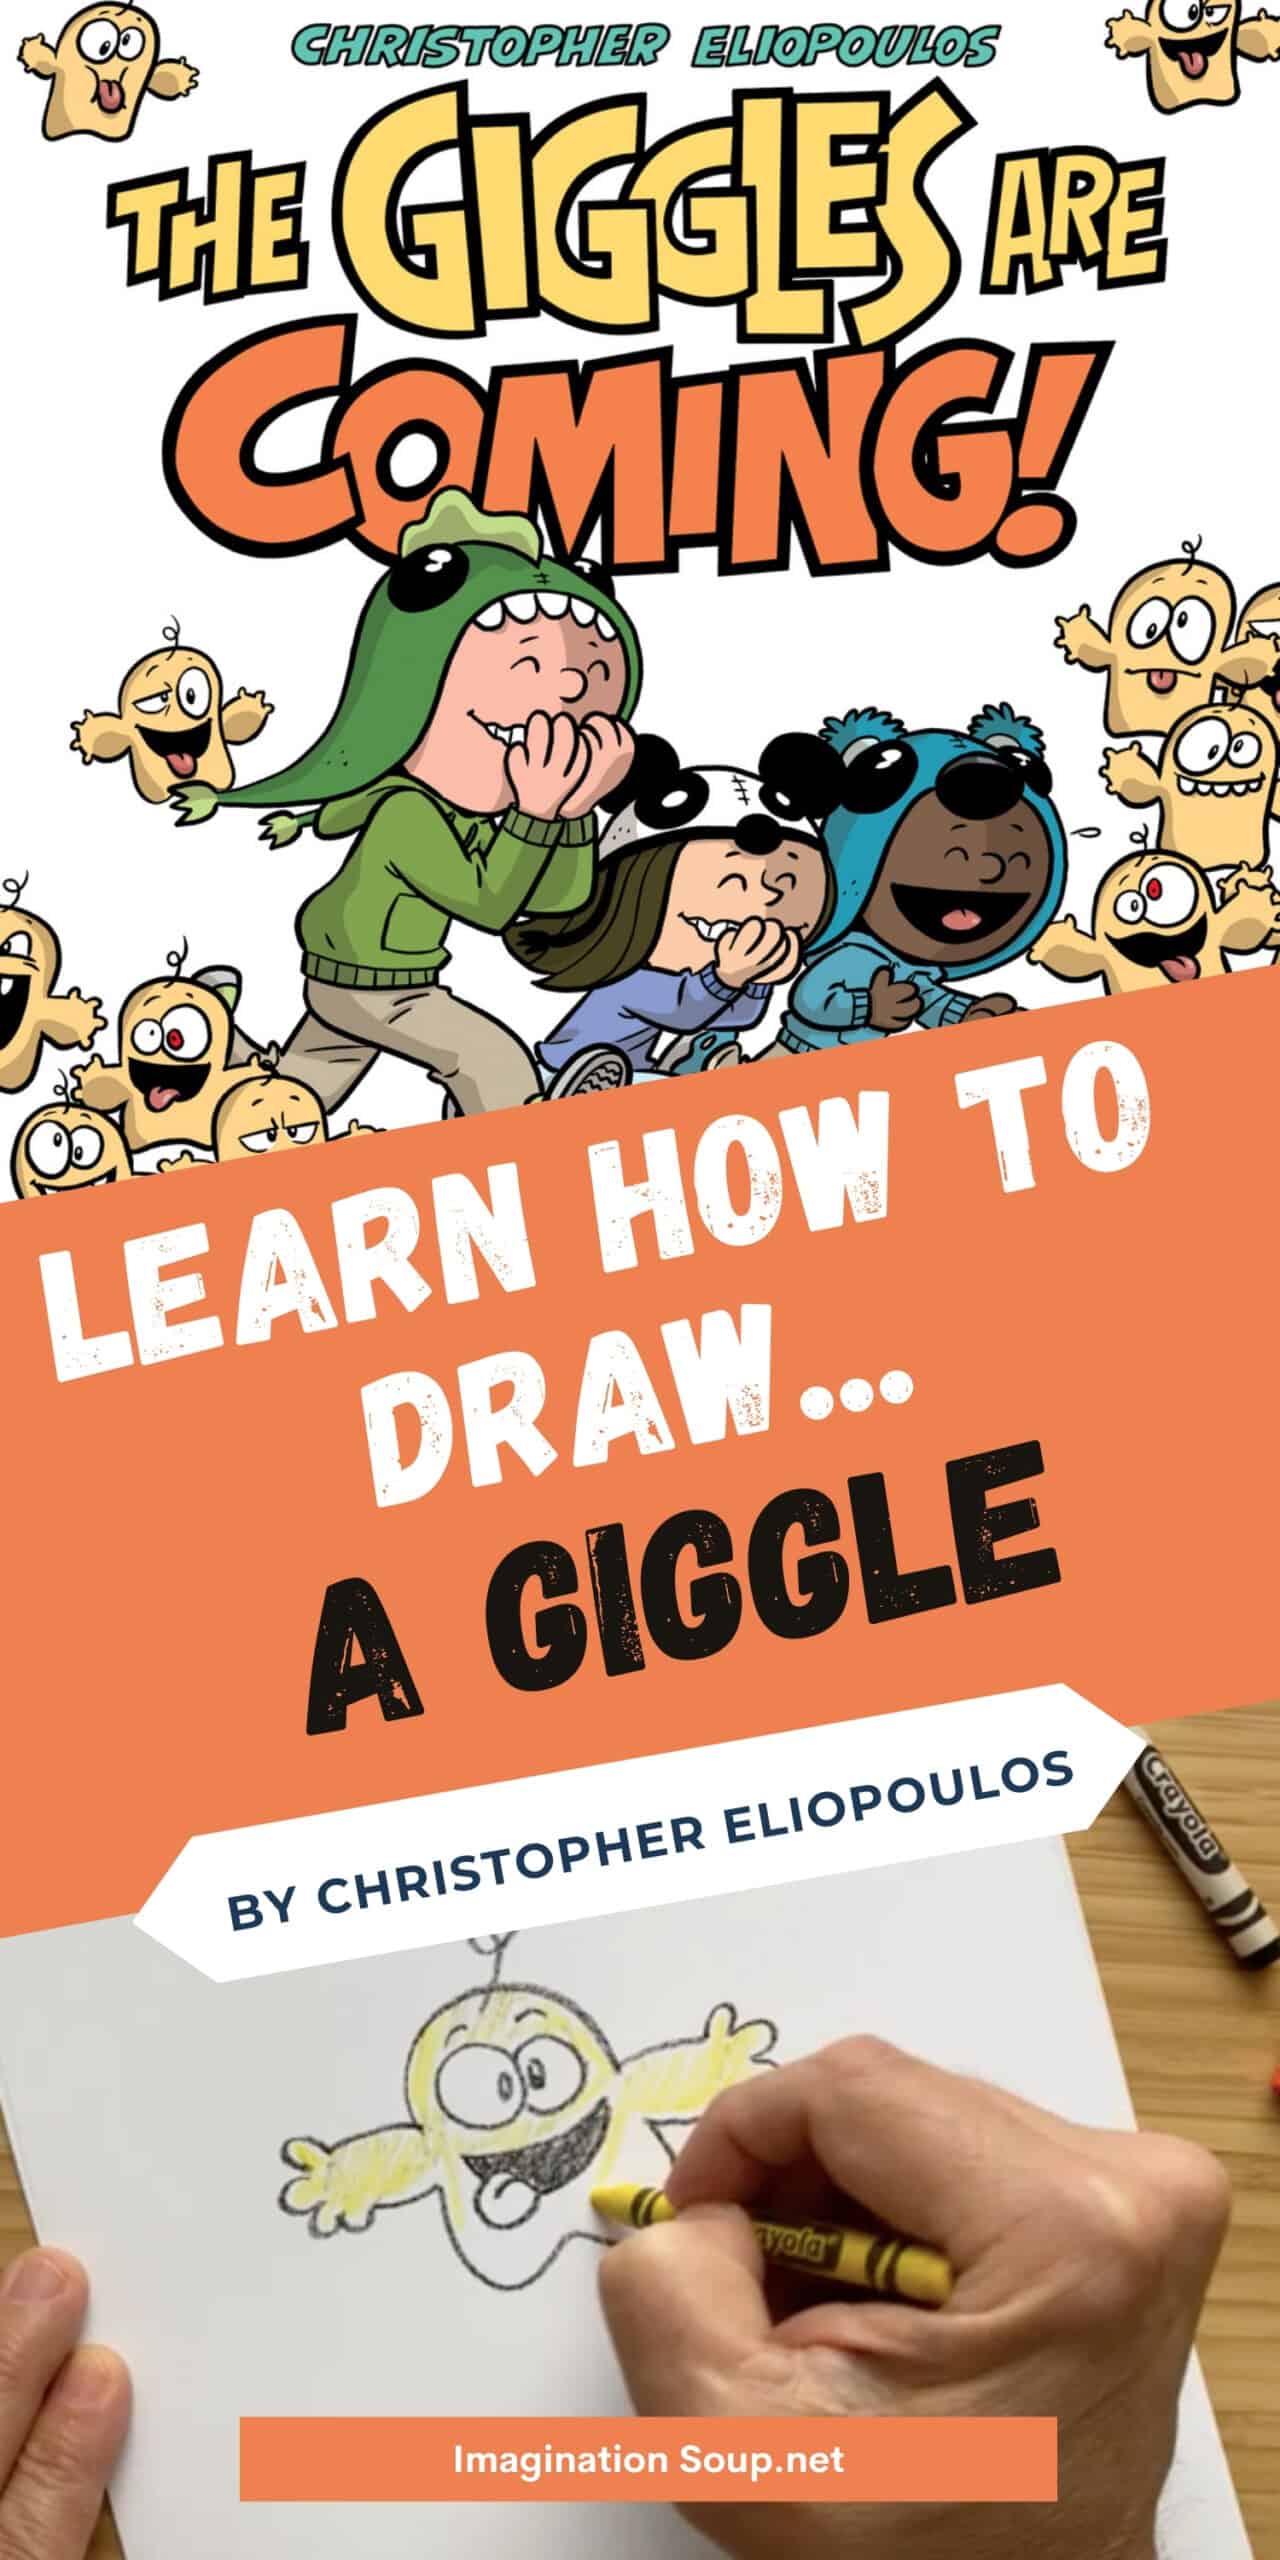 step by step how to video for drawing a giggle by Christopher Eliopoulos